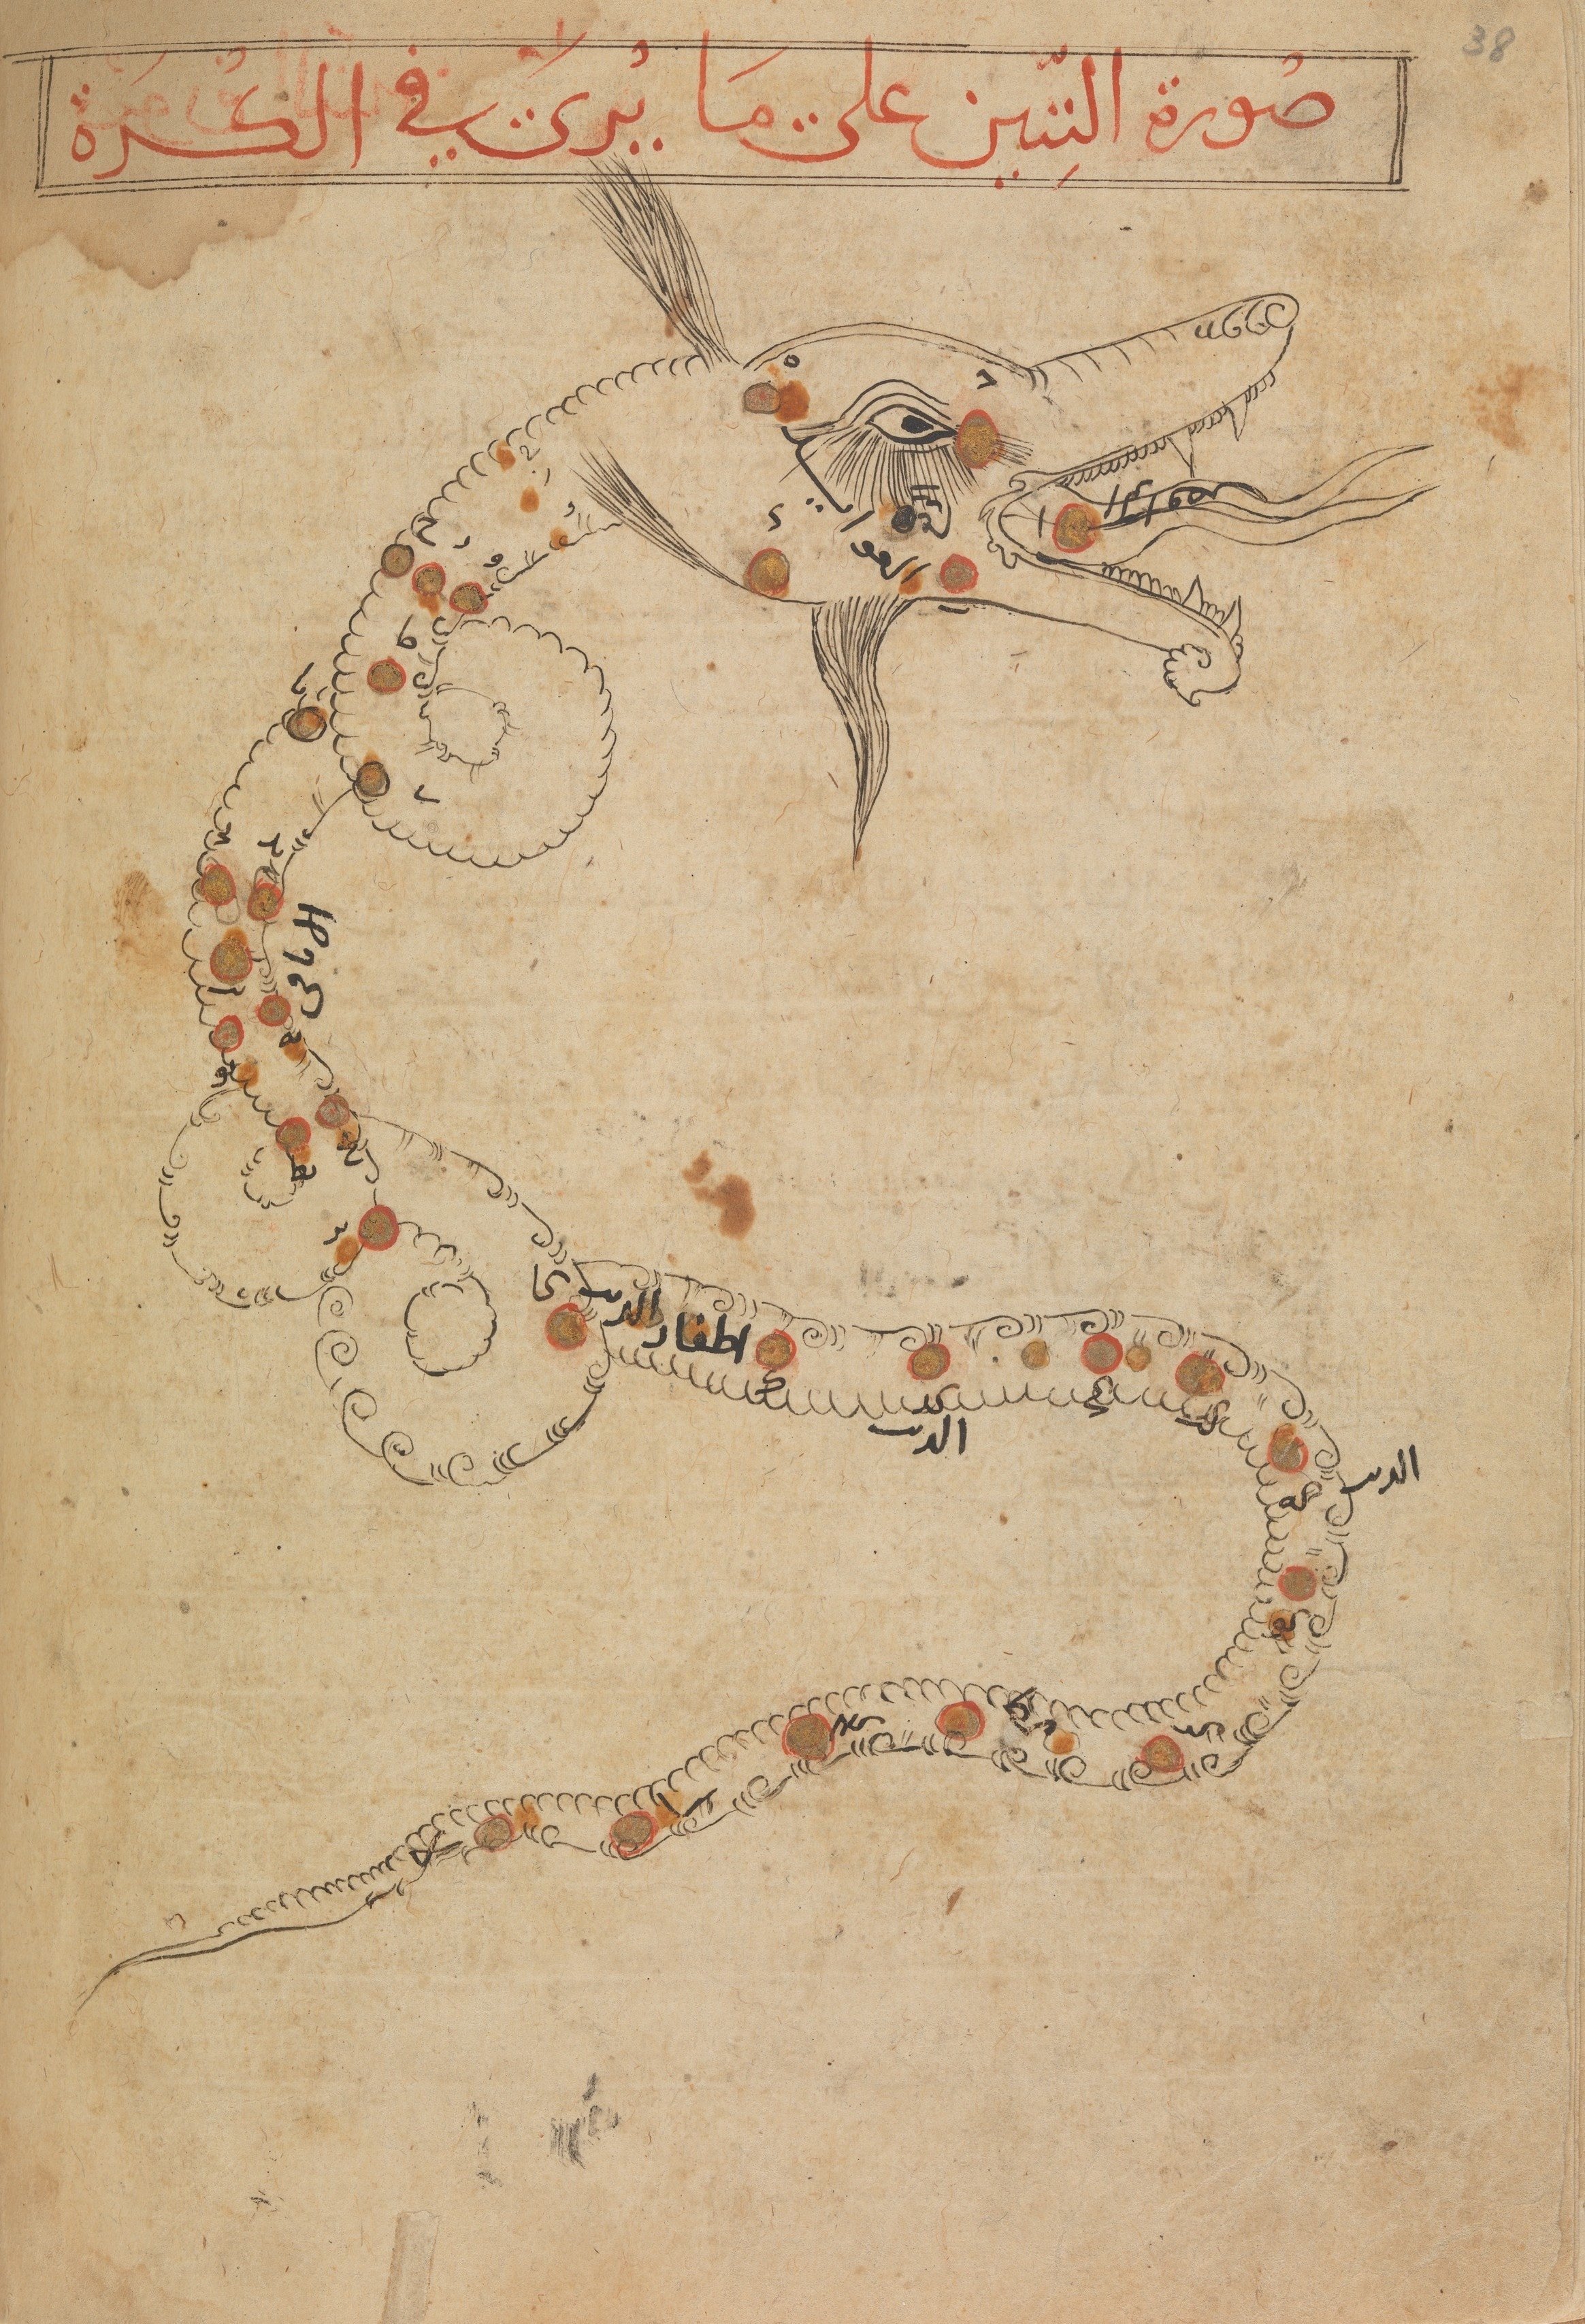 Constellation illustration of a dragon with Arabic writing